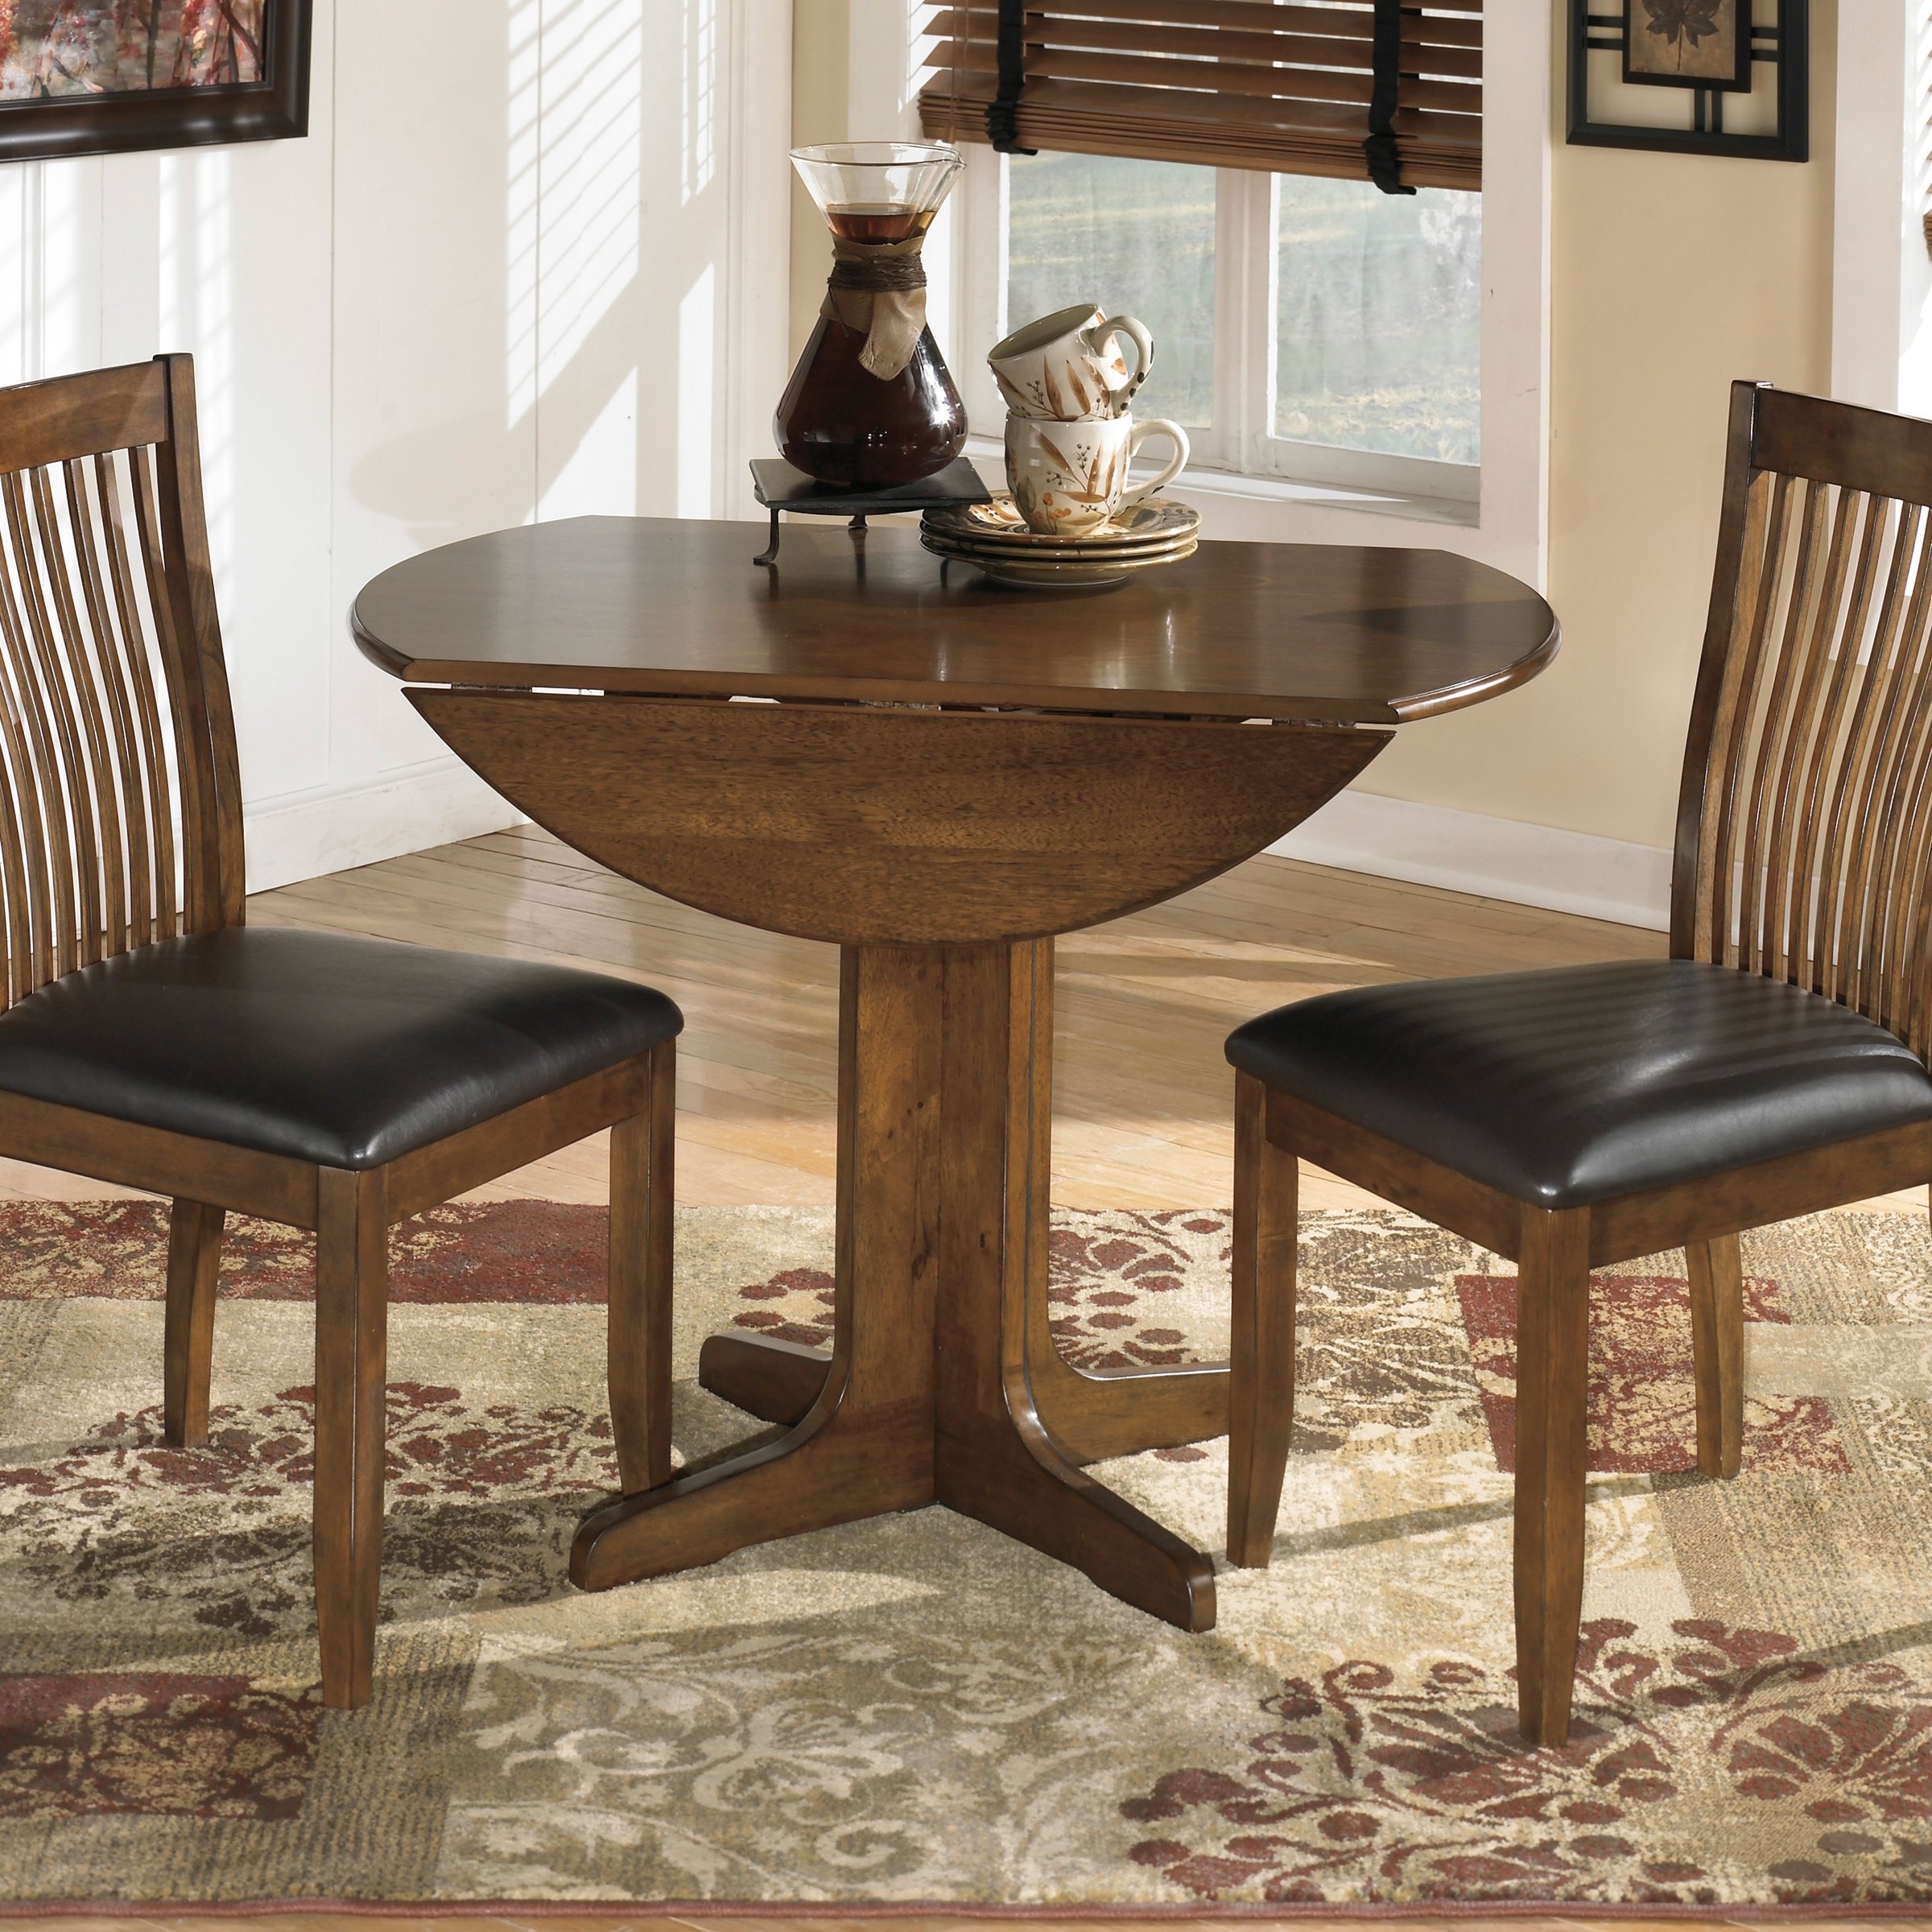 Small Circle Dining Room Table photo - 2